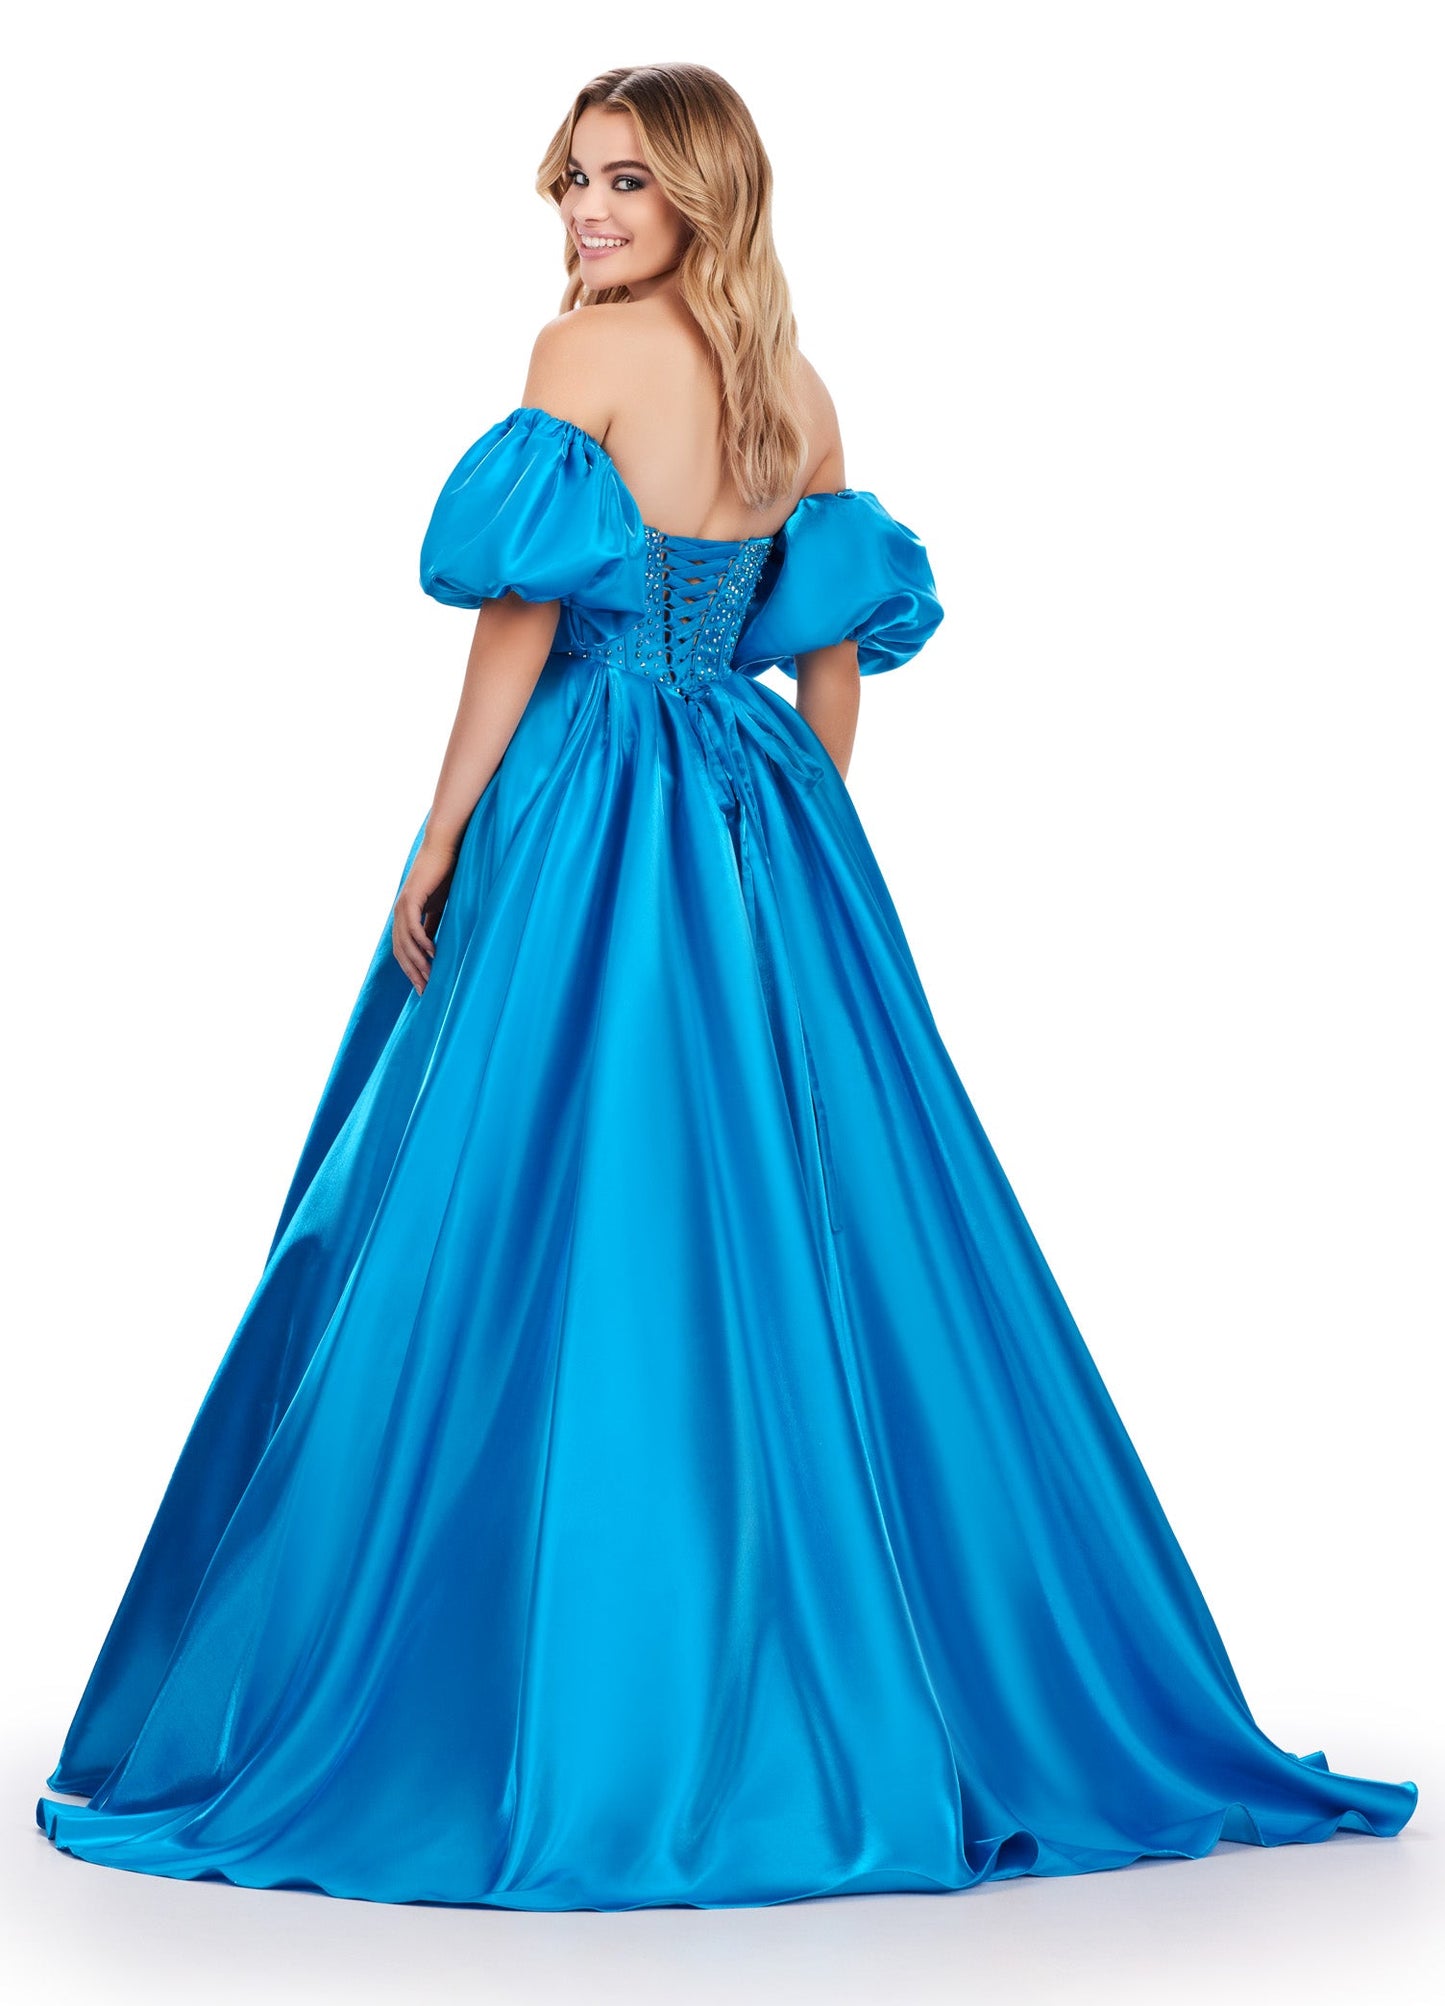 Elevate your formalwear with the Ashley Lauren 11642 prom dress. The luxurious satin fabric, sweetheart neckline, and crystal corset add elegance and charm to this A-line ballgown. The puff sleeves bring a touch of drama and playfulness to your look. Perfect for prom or pageants. A satin ball gown fit for a queen. This strapless dress features a beaded corset bodice with detachable puff sleeves and a lace up back.